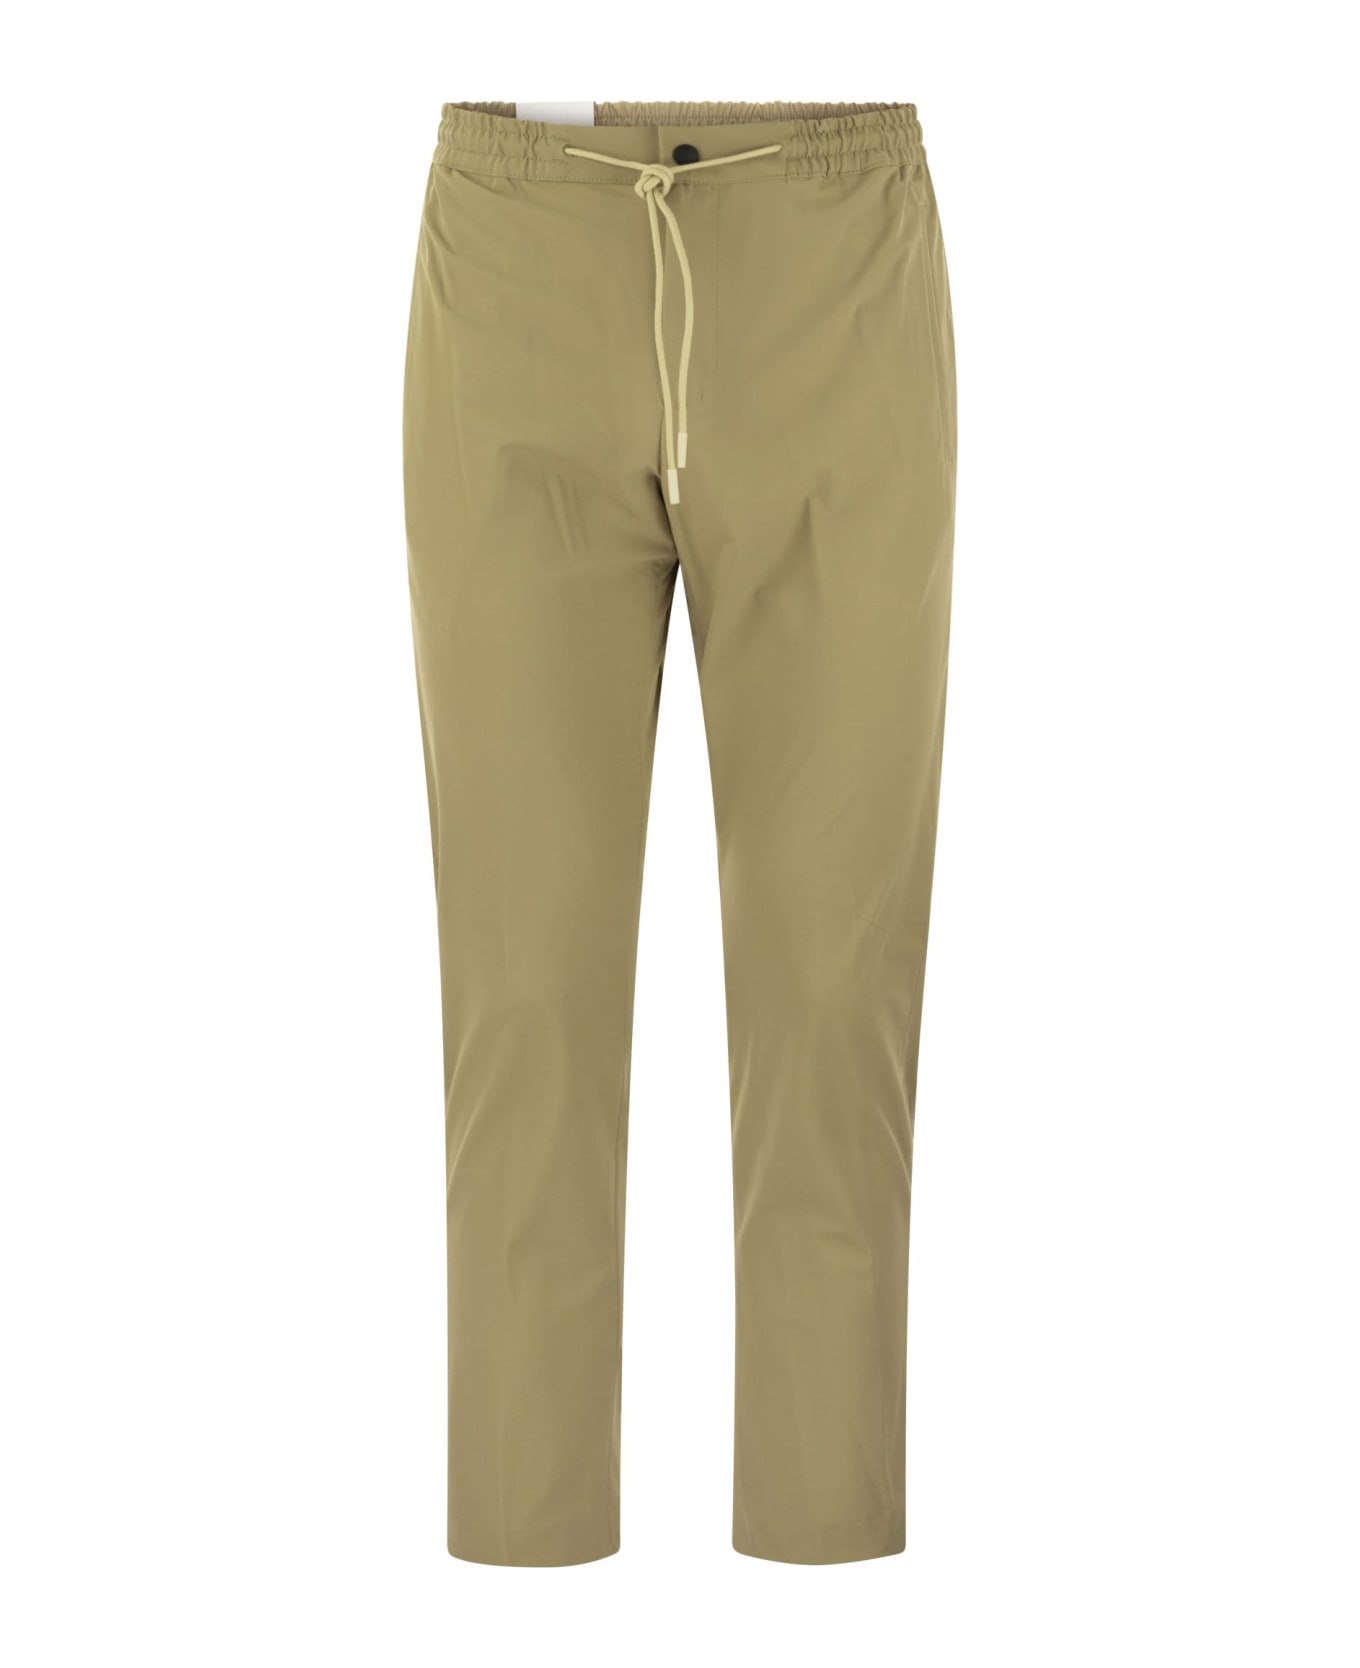 PT01 'omega' Trousers In Technical Fabric - Corda